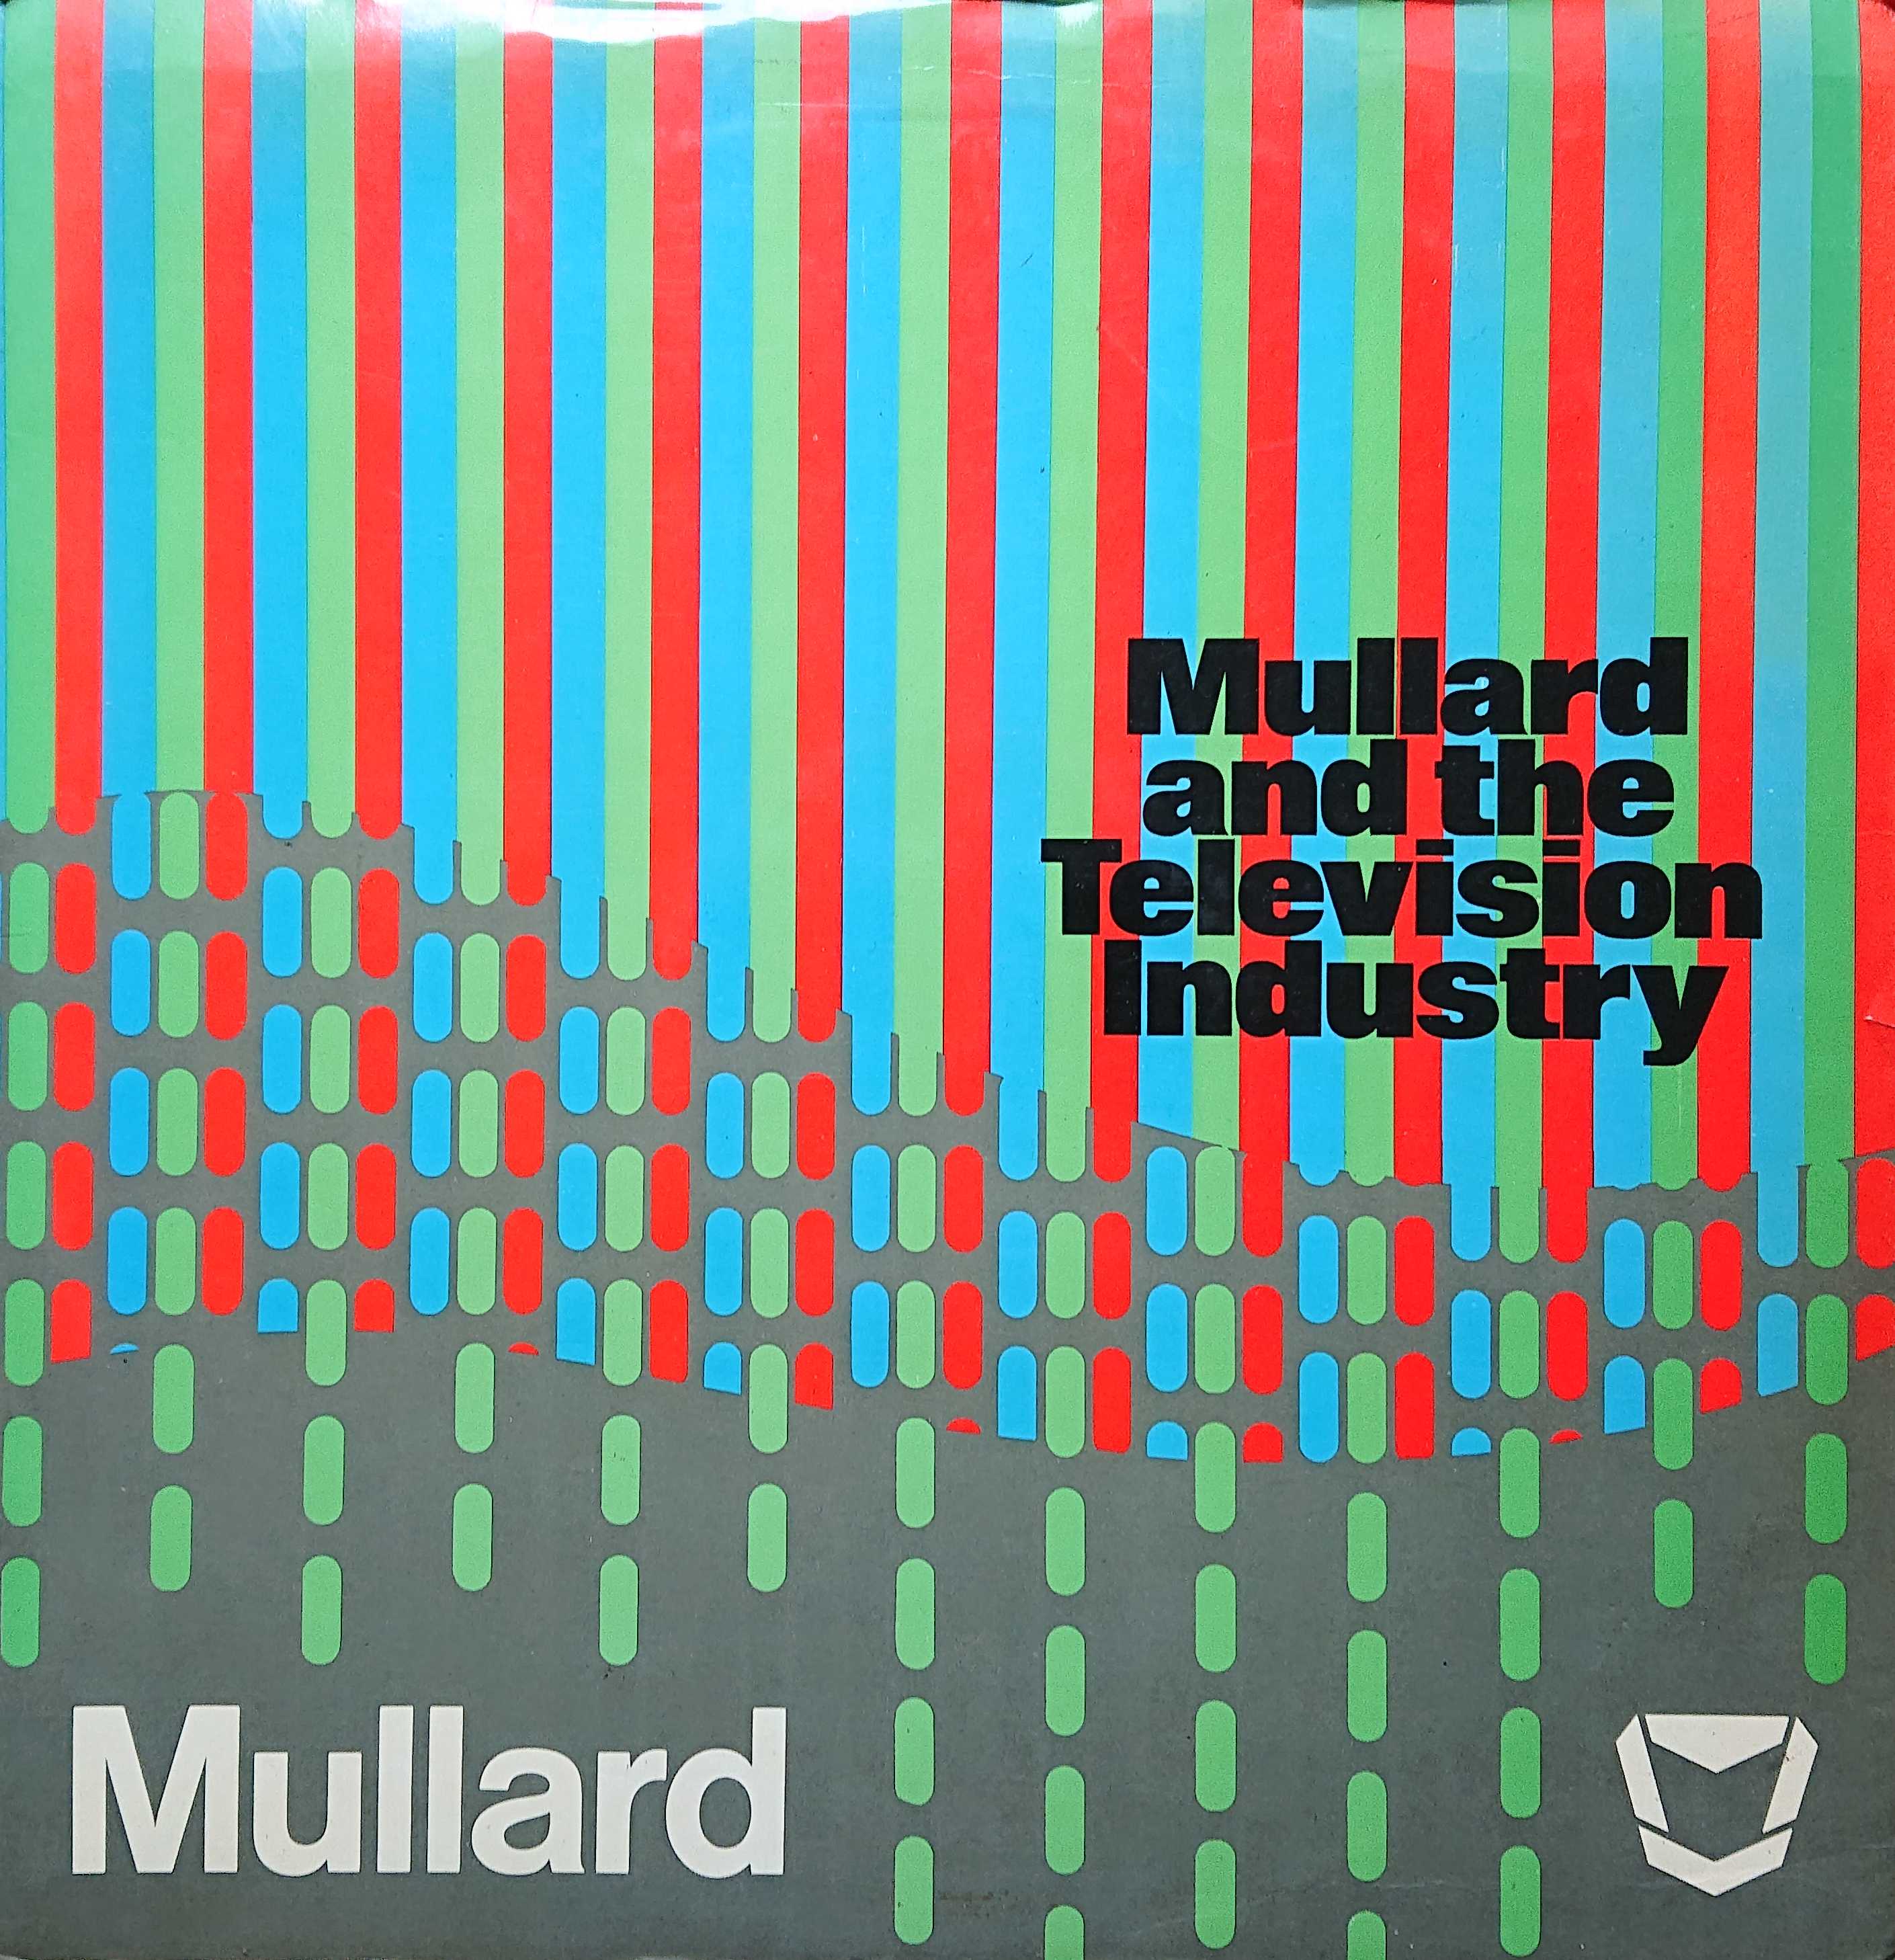 Picture of Mullard and the television industry by artist Various from the BBC albums - Records and Tapes library